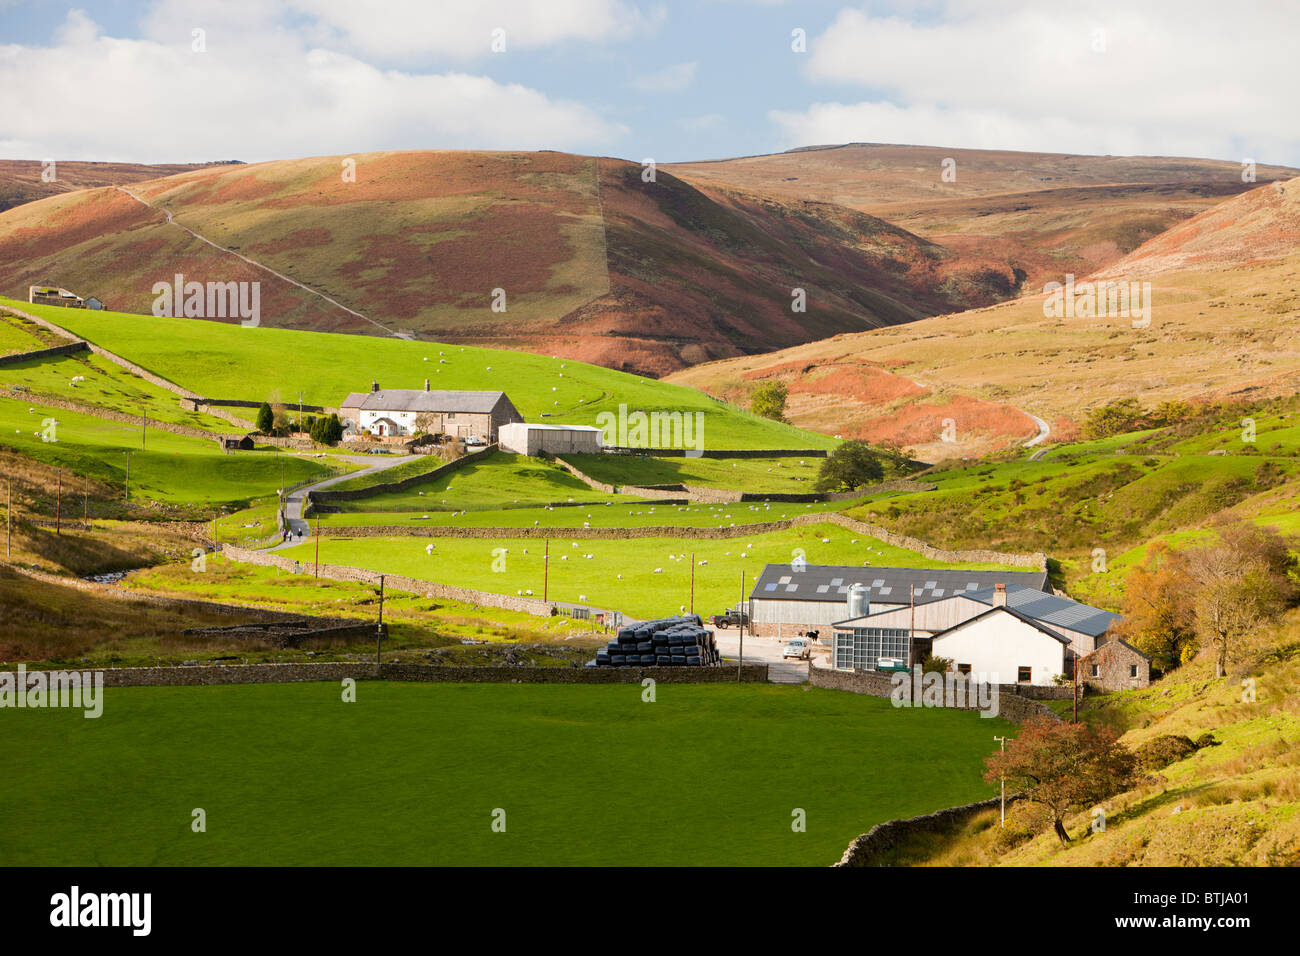 A remote hill farm in the Brennand Valley off the Dunsop Valley above Dunsop Bridge in the Trough of Bowland, Lancashire, UK. Stock Photo